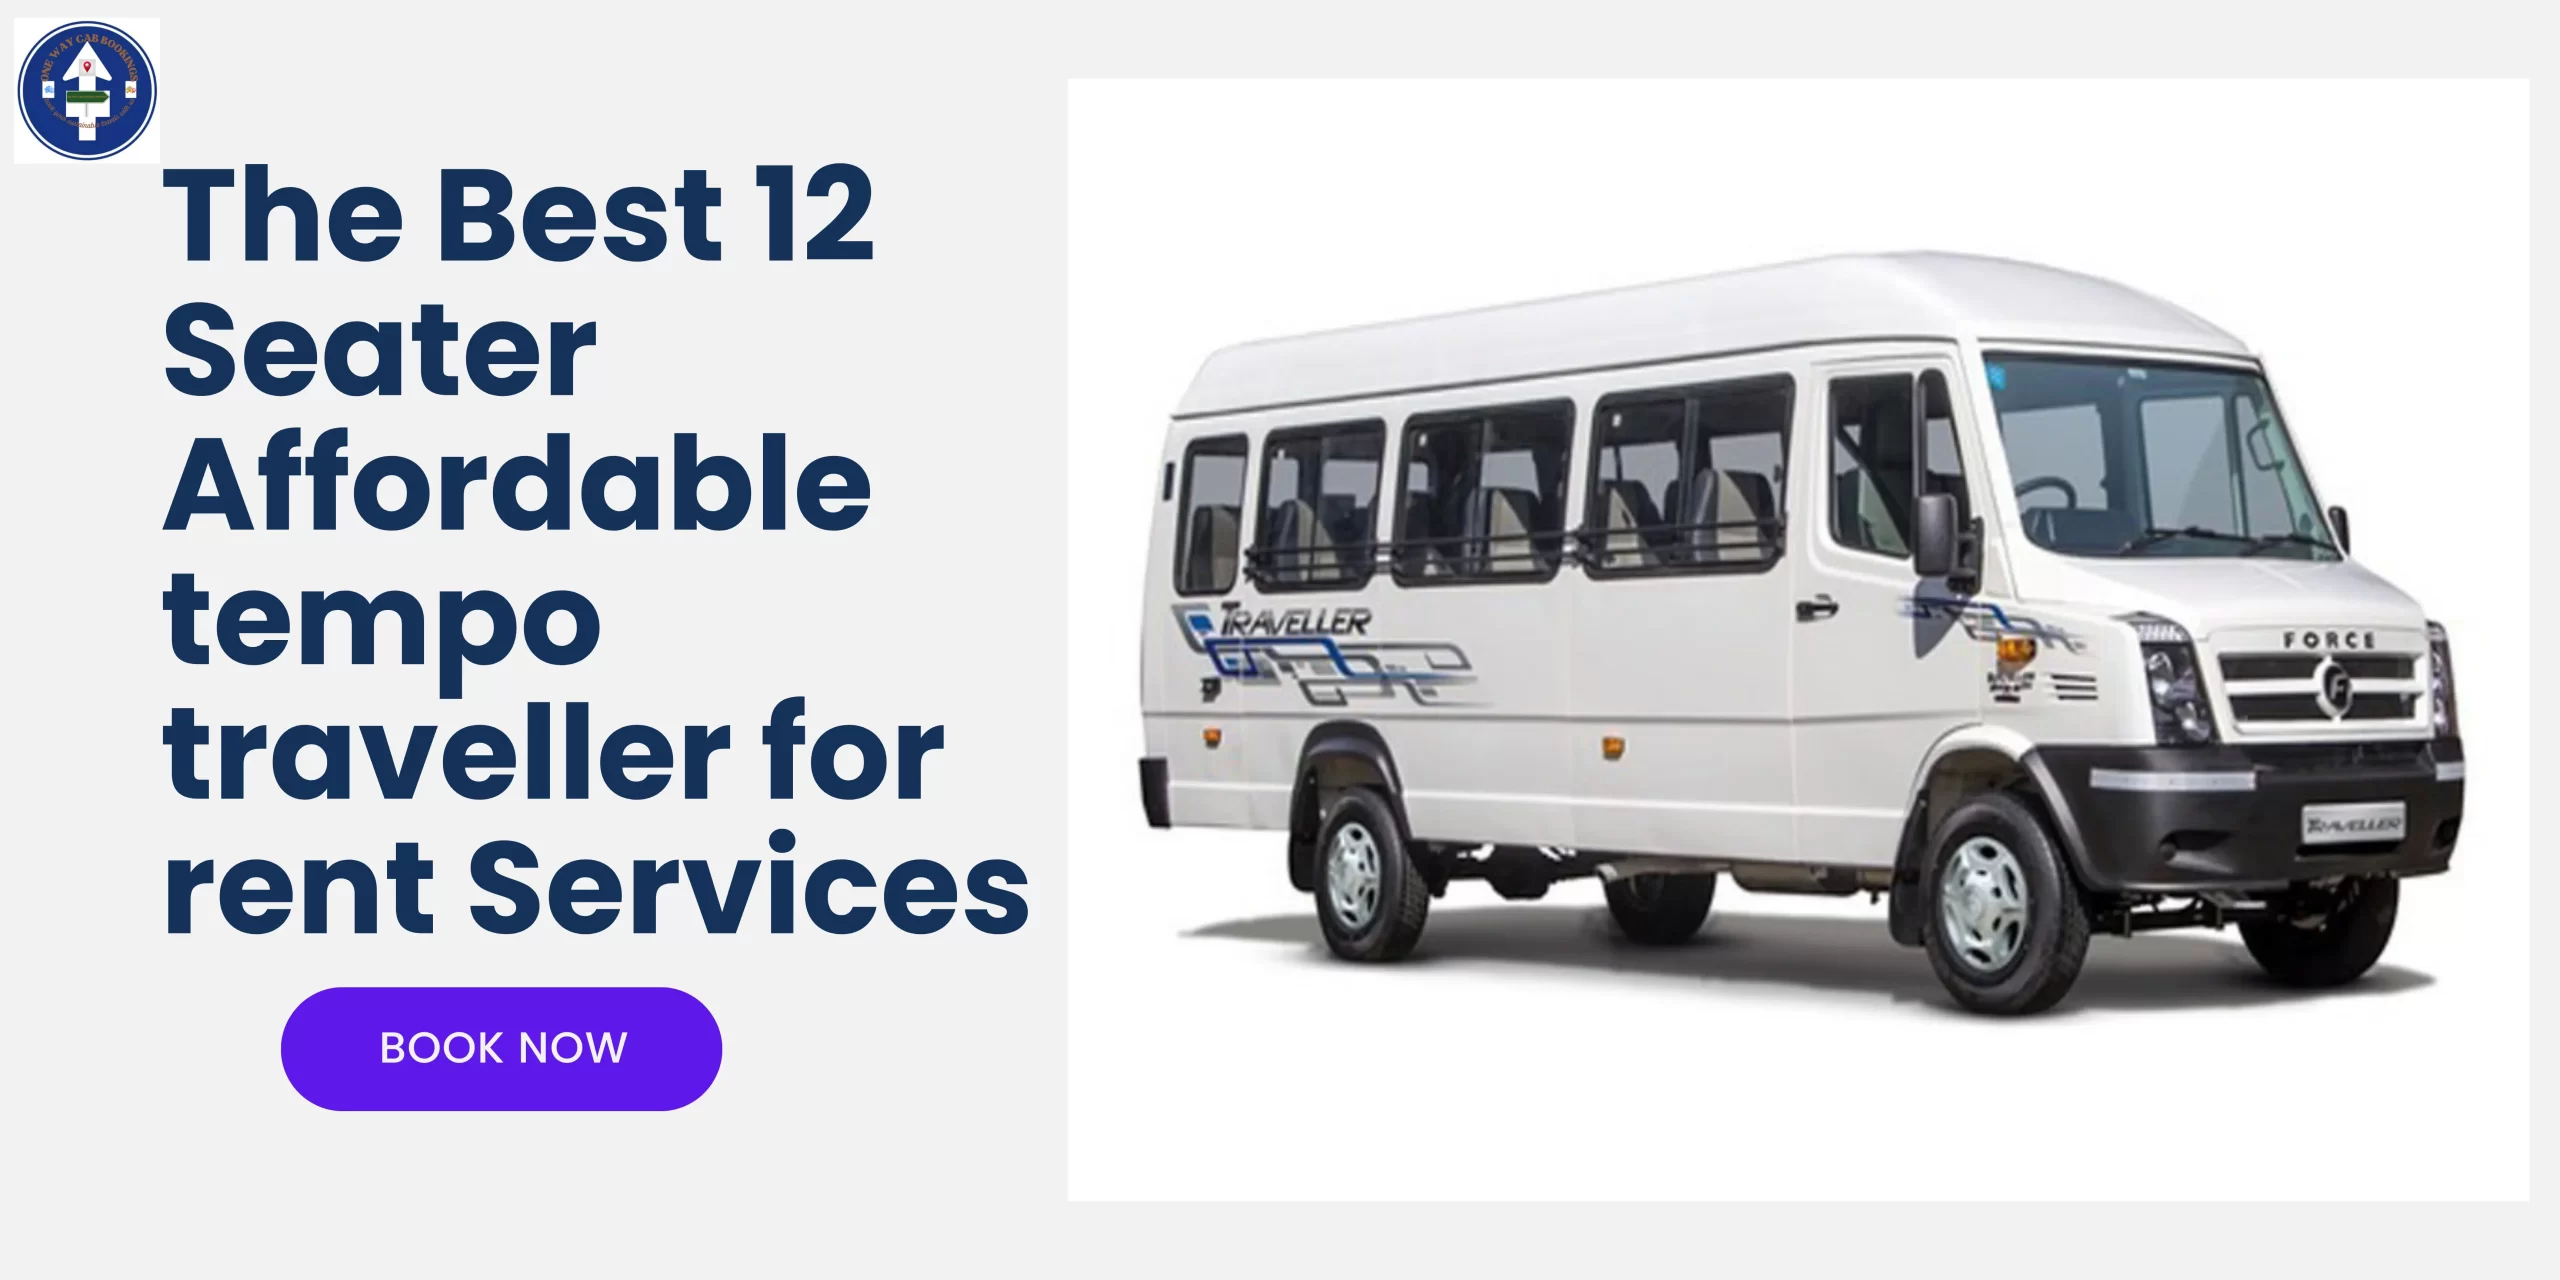 The Best 12 Seater Affordable Tempo Traveller For Rent Services